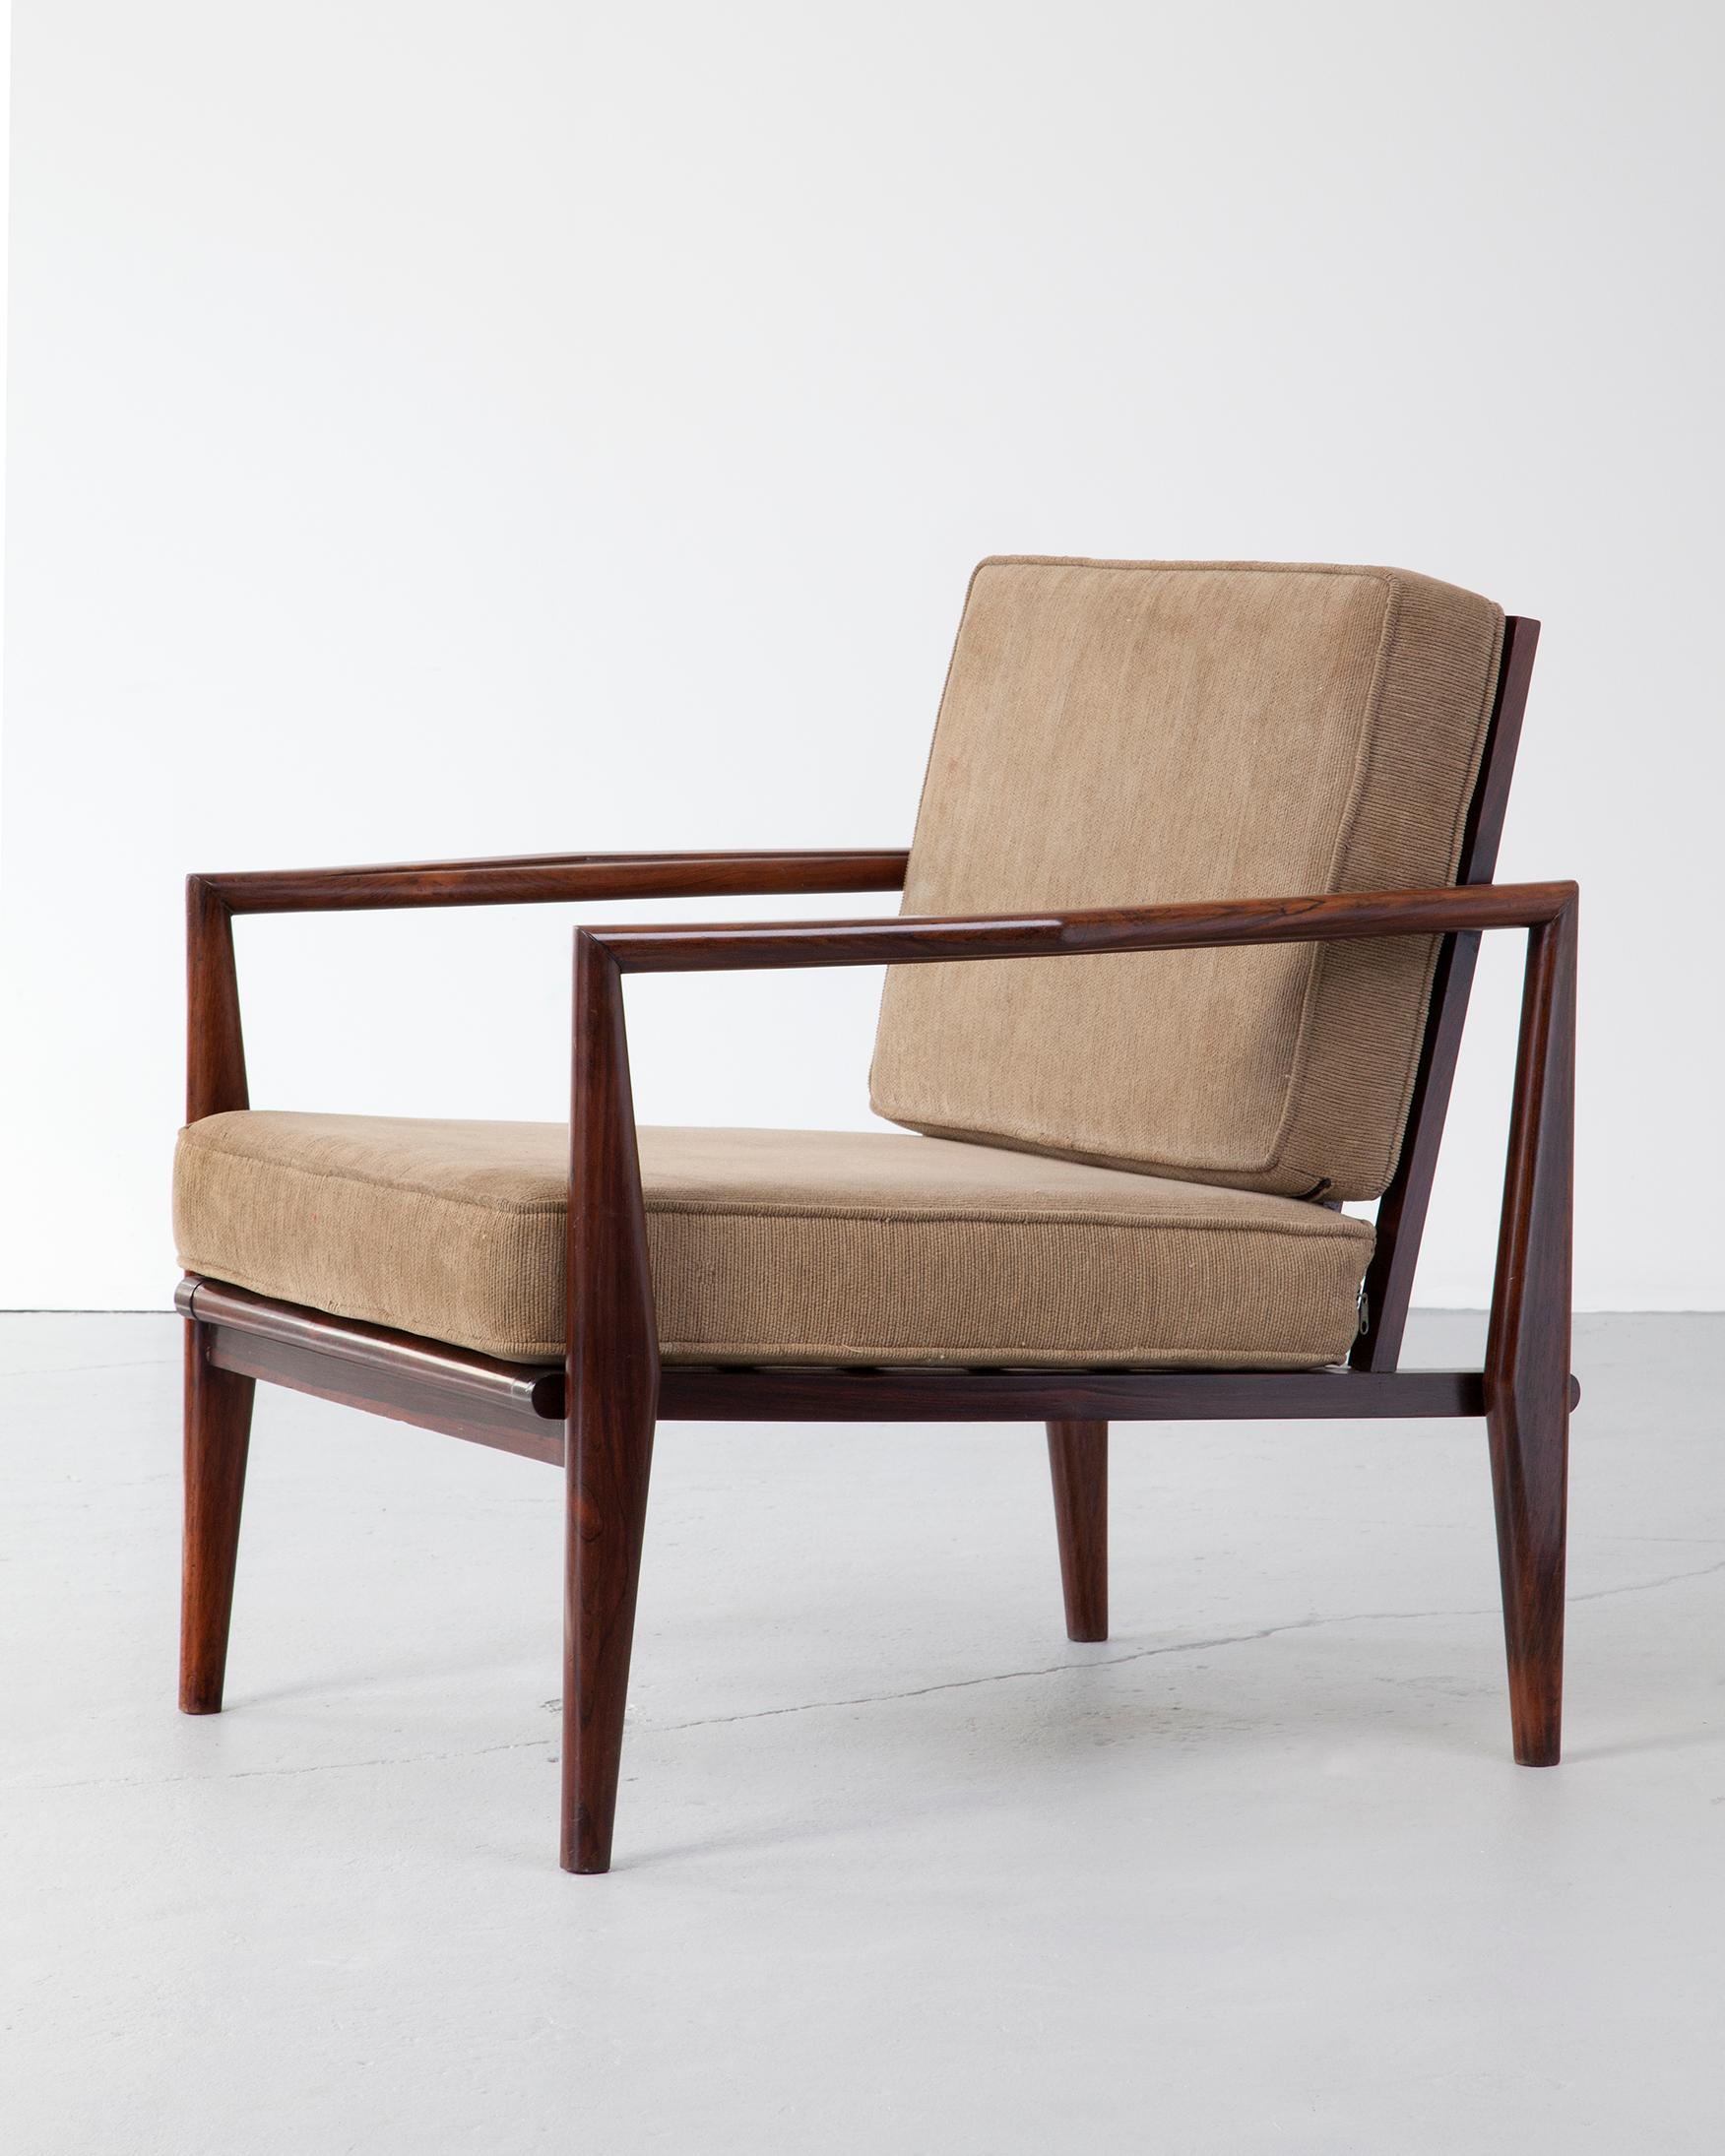 Lounge chair in rosewood with upholstered seat and back cushions. Produced by Fatima, Brazil, 1960s. (seat: 16